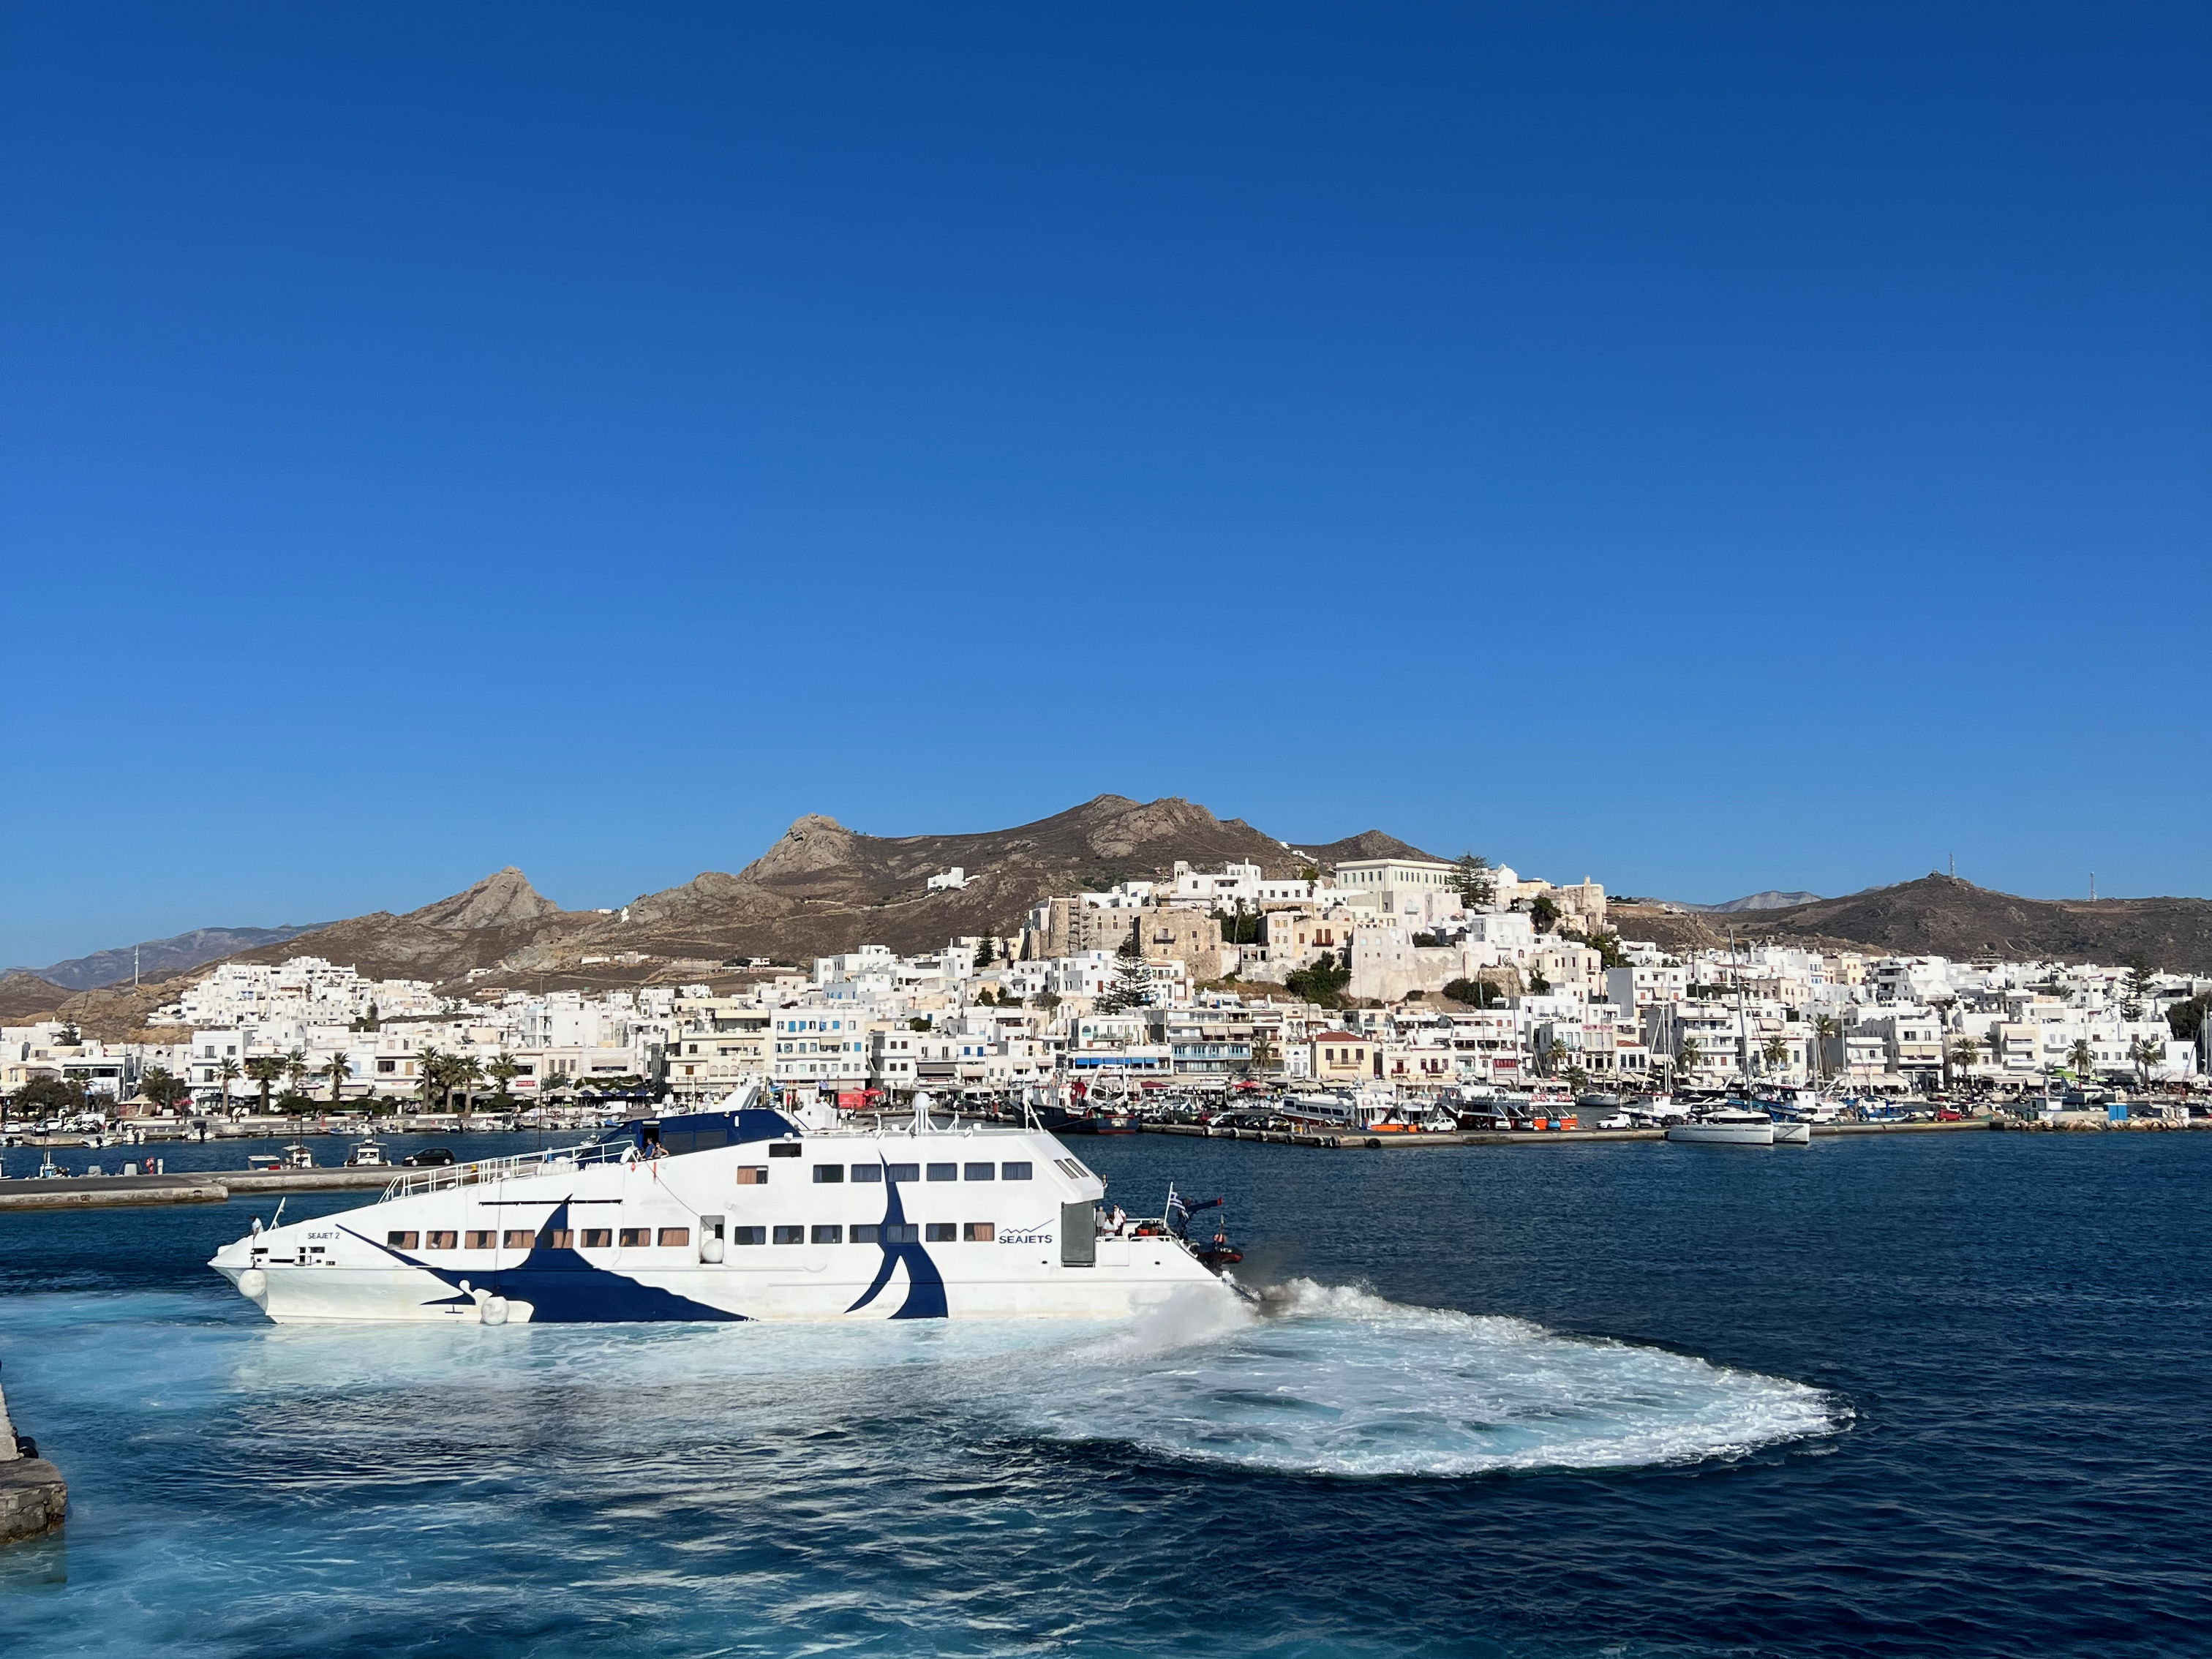 View from the ferry on Naxos